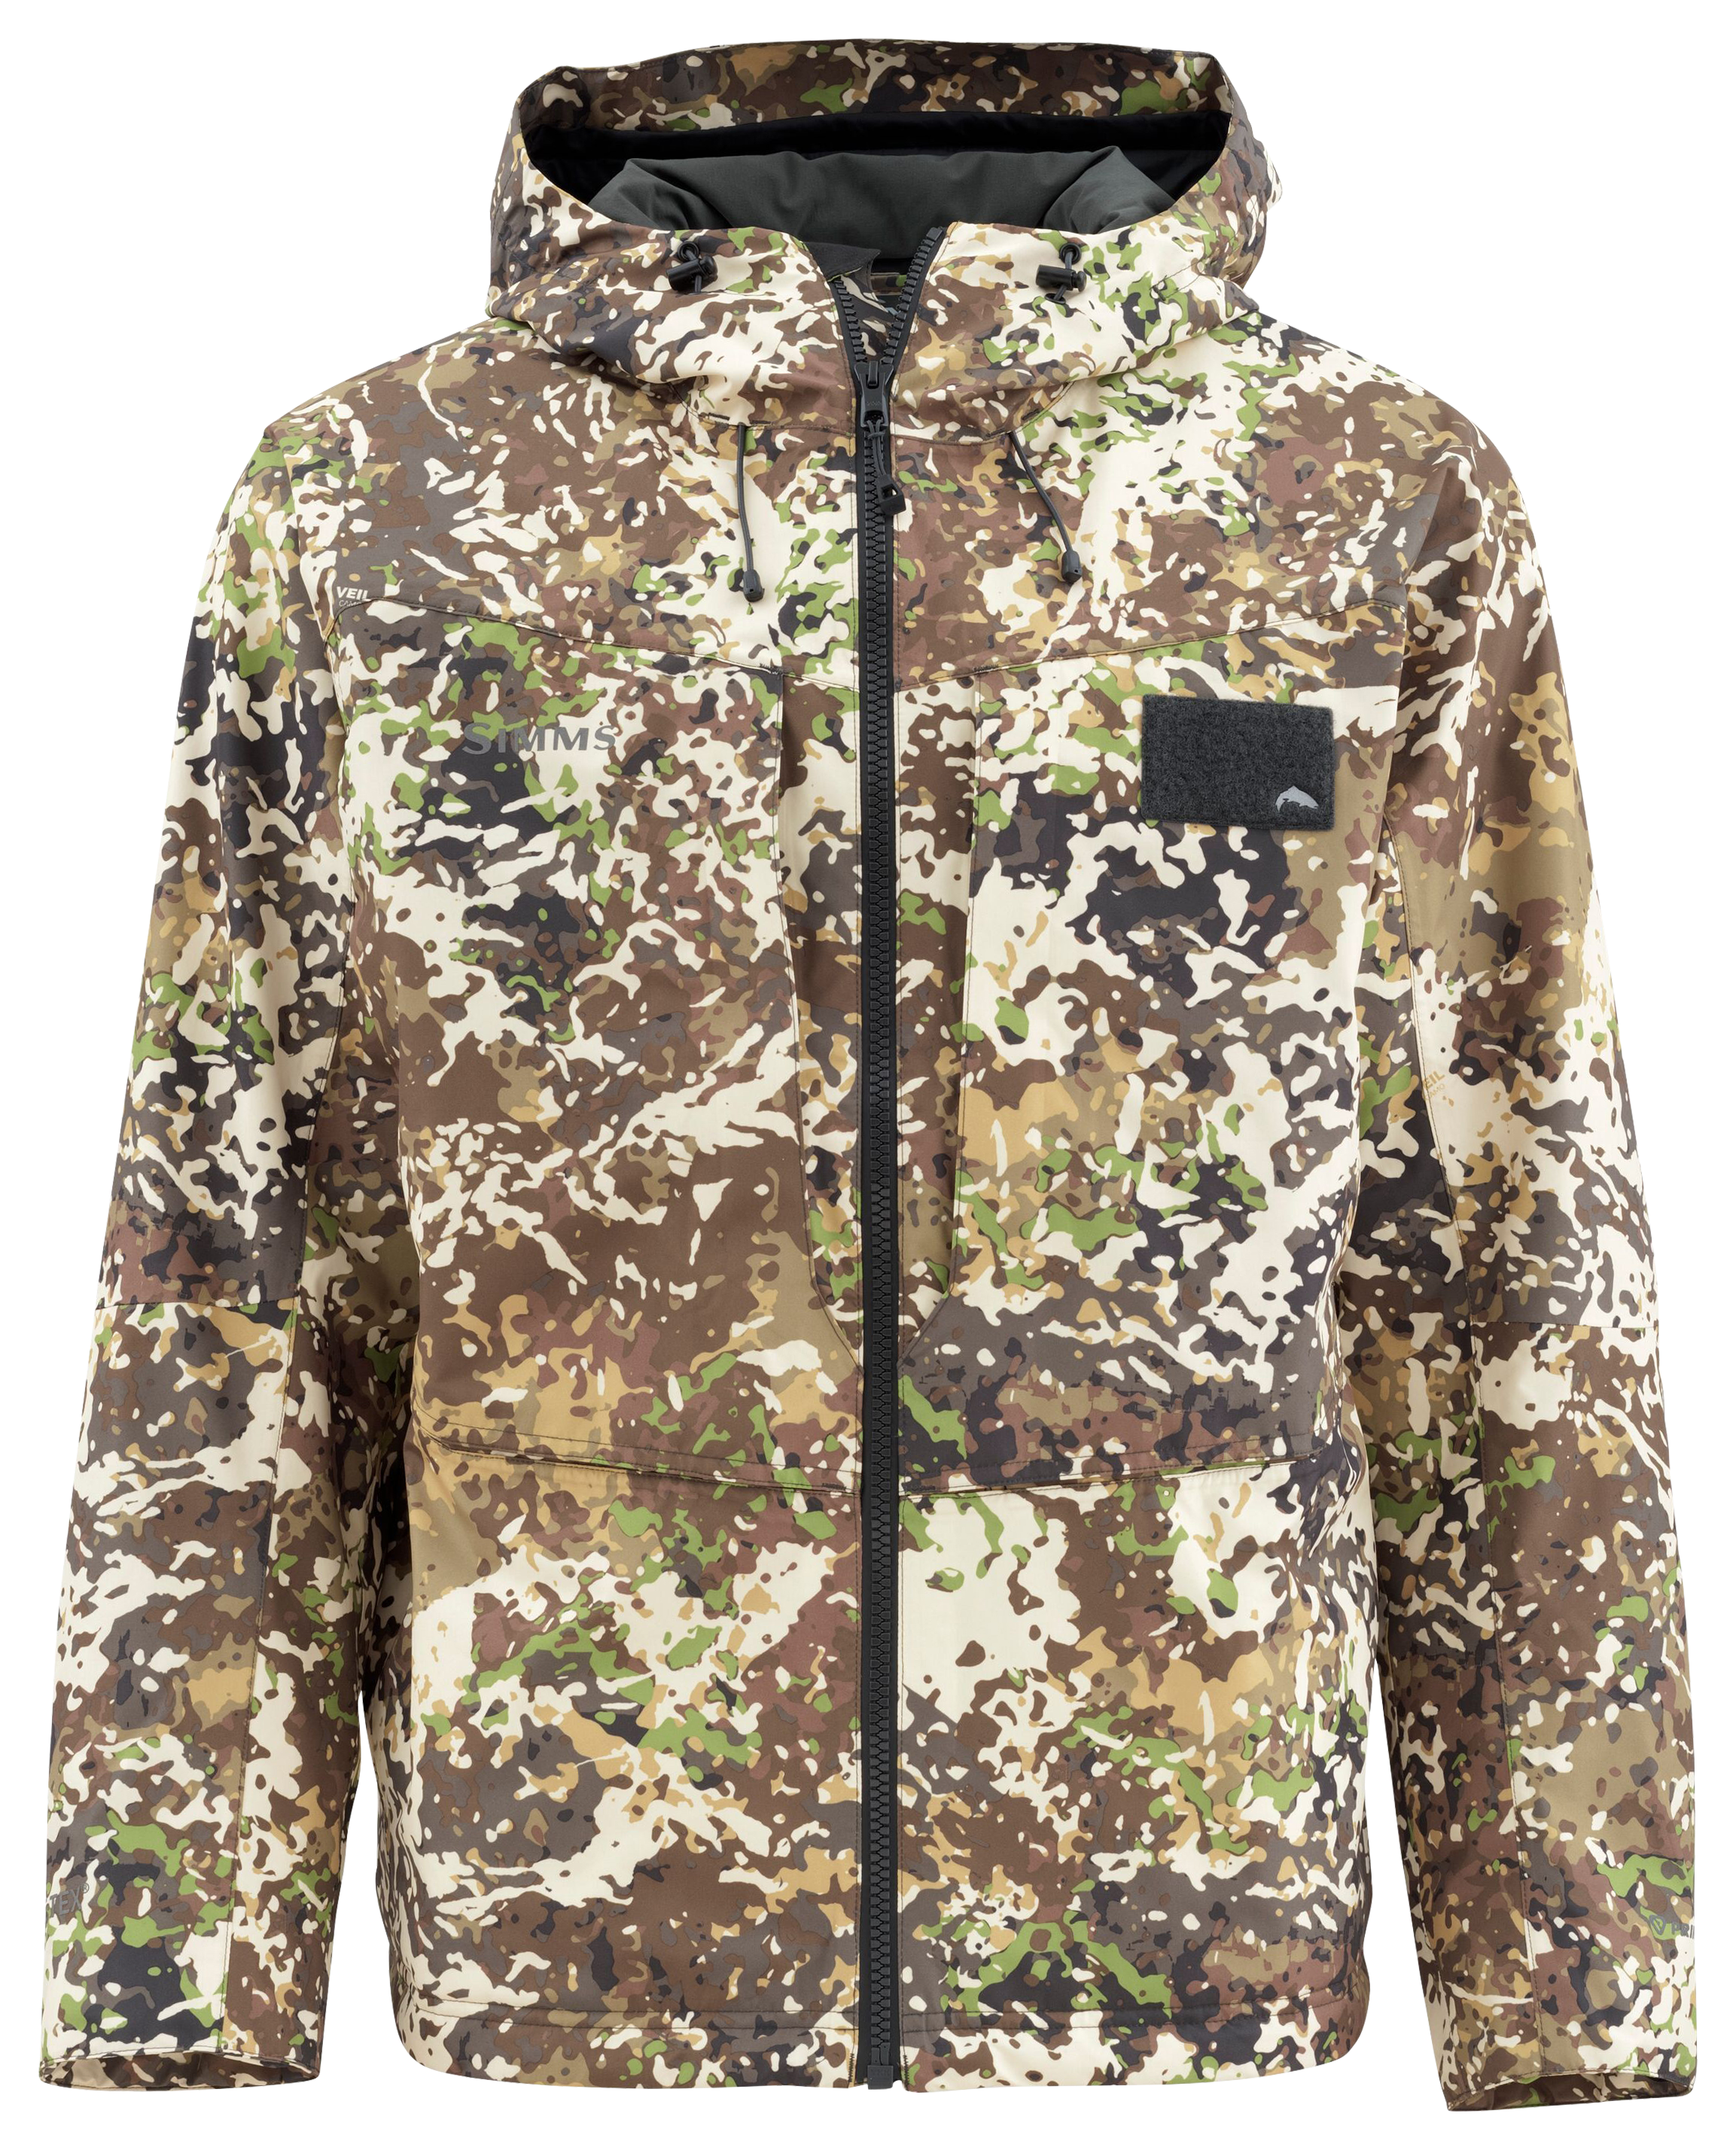 Simms Bulkley Insulated GORE-TEX Jacket for Men